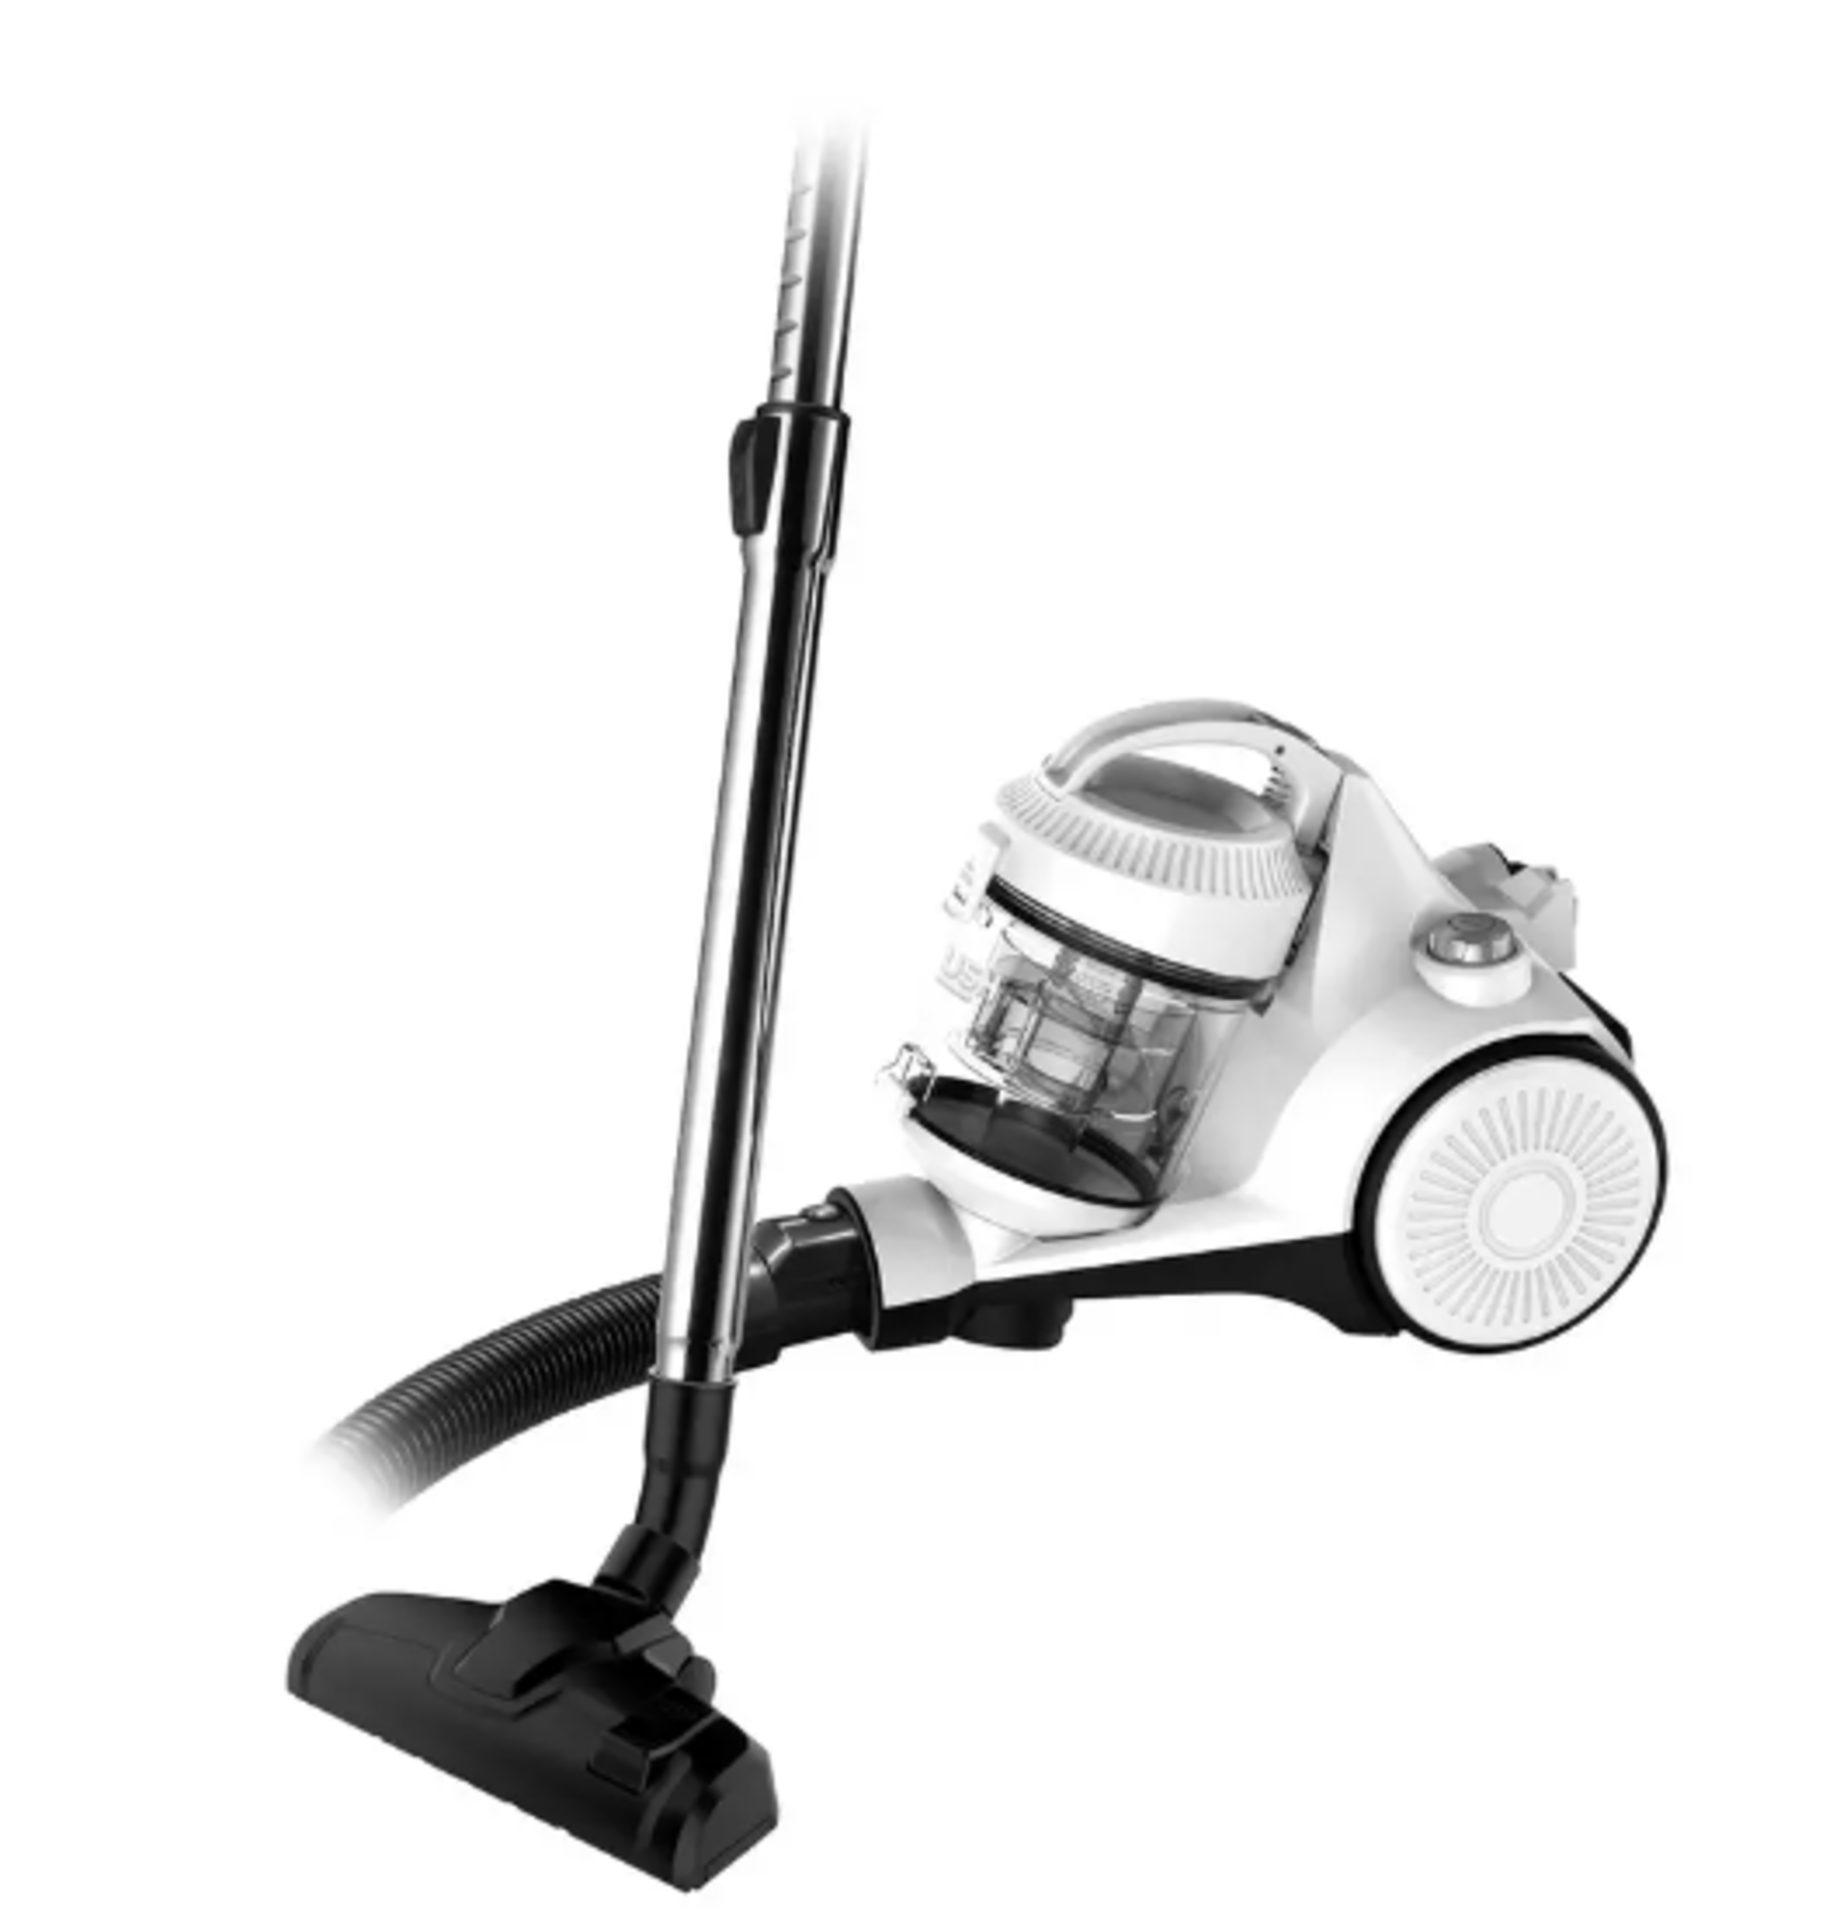 Bush Bagless Cylinder Vacuum Cleaner. RRP £95.00. - EBR *BOXED*. Deal with dust and dander with